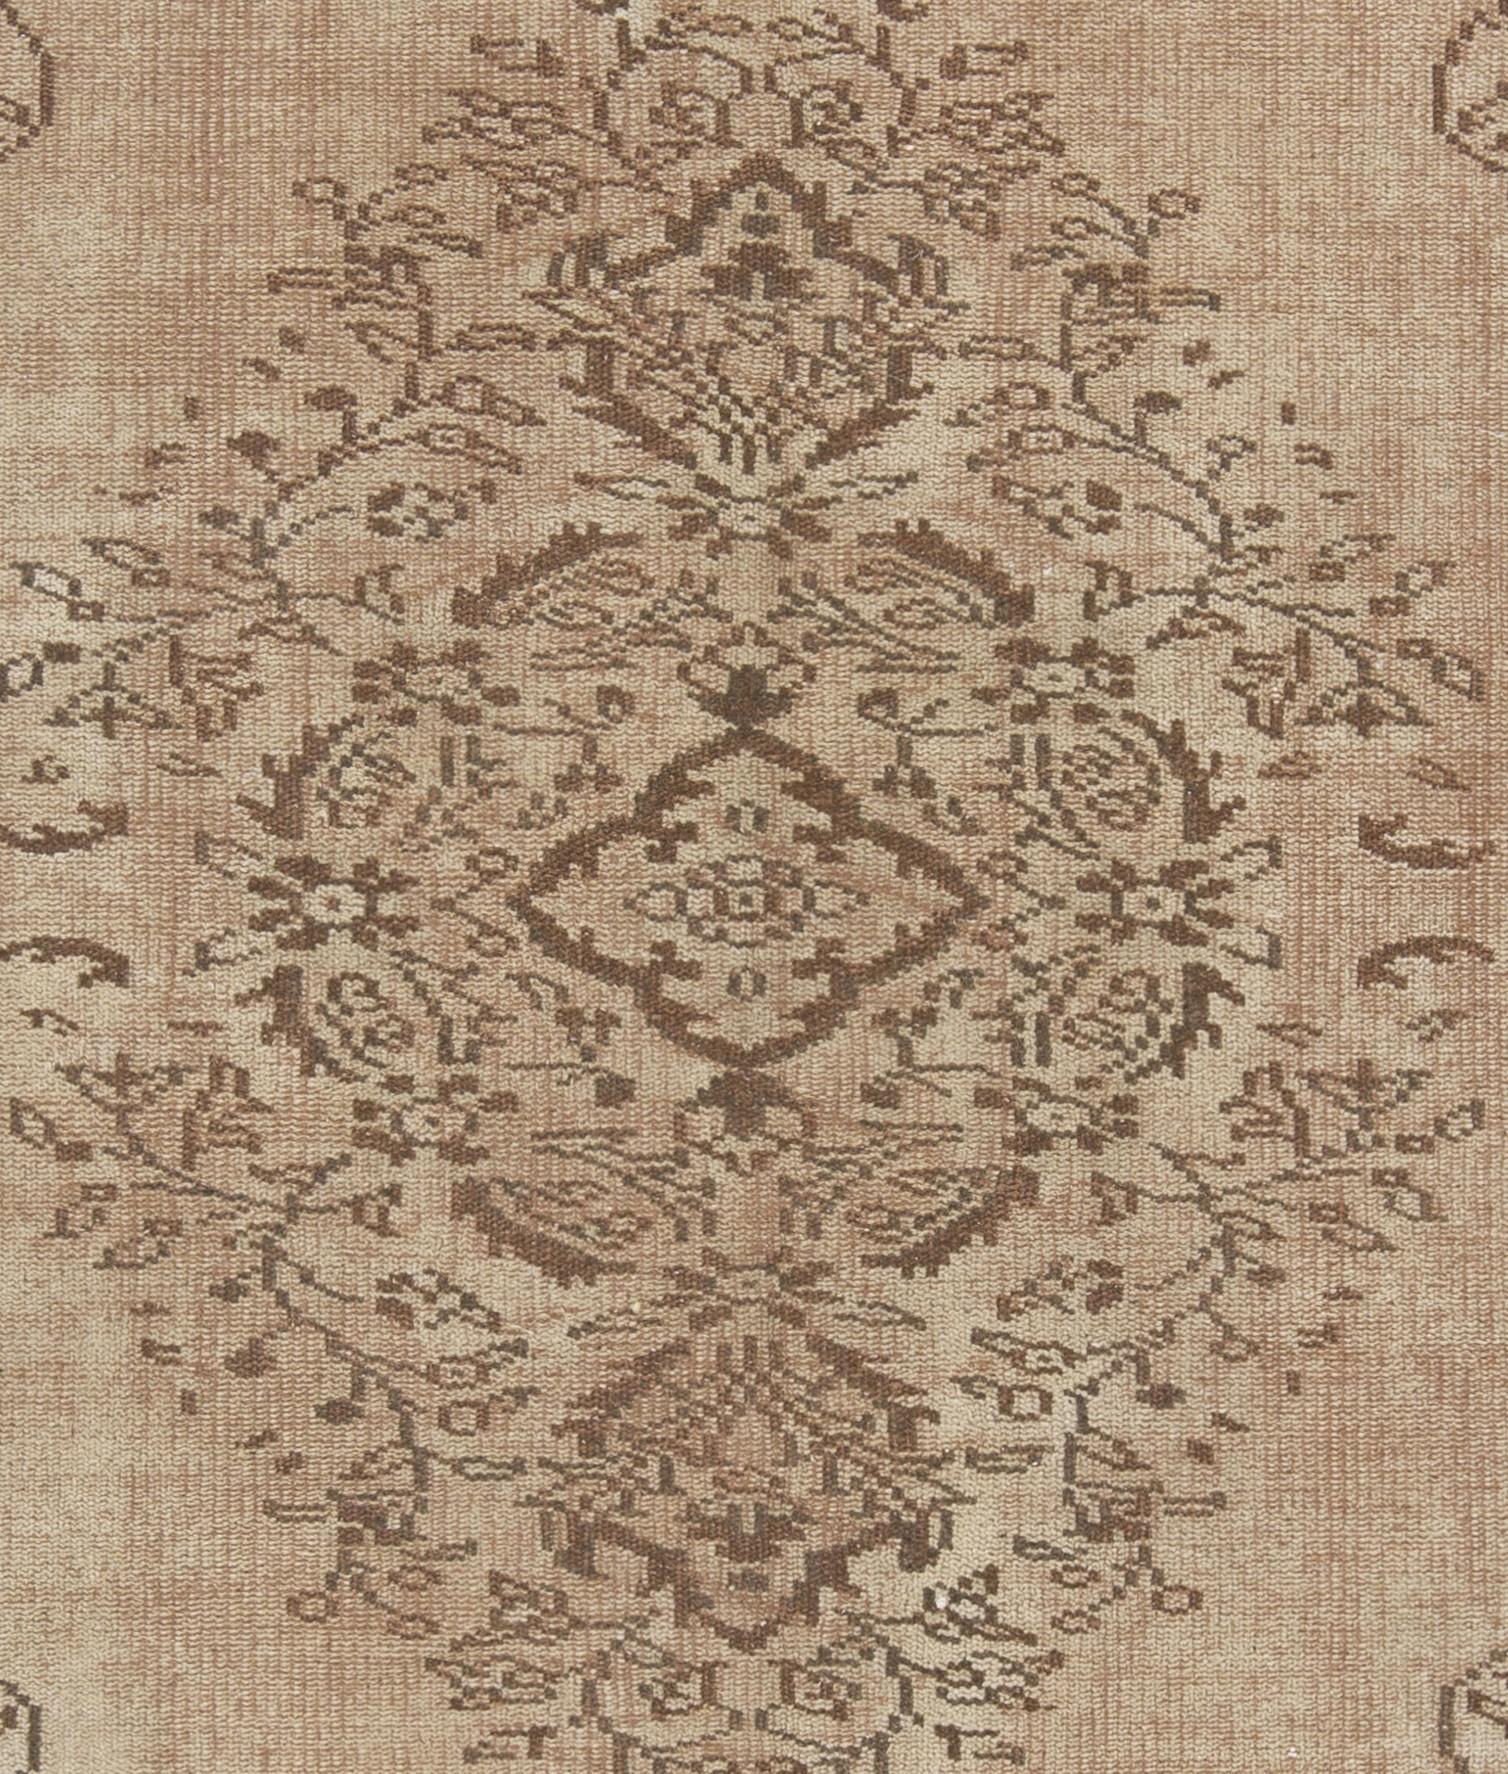 Modern 5.4x7.8 Ft Hand-Knotted Vintage Central Anatolian Wool Area Rug in Brown Colors For Sale